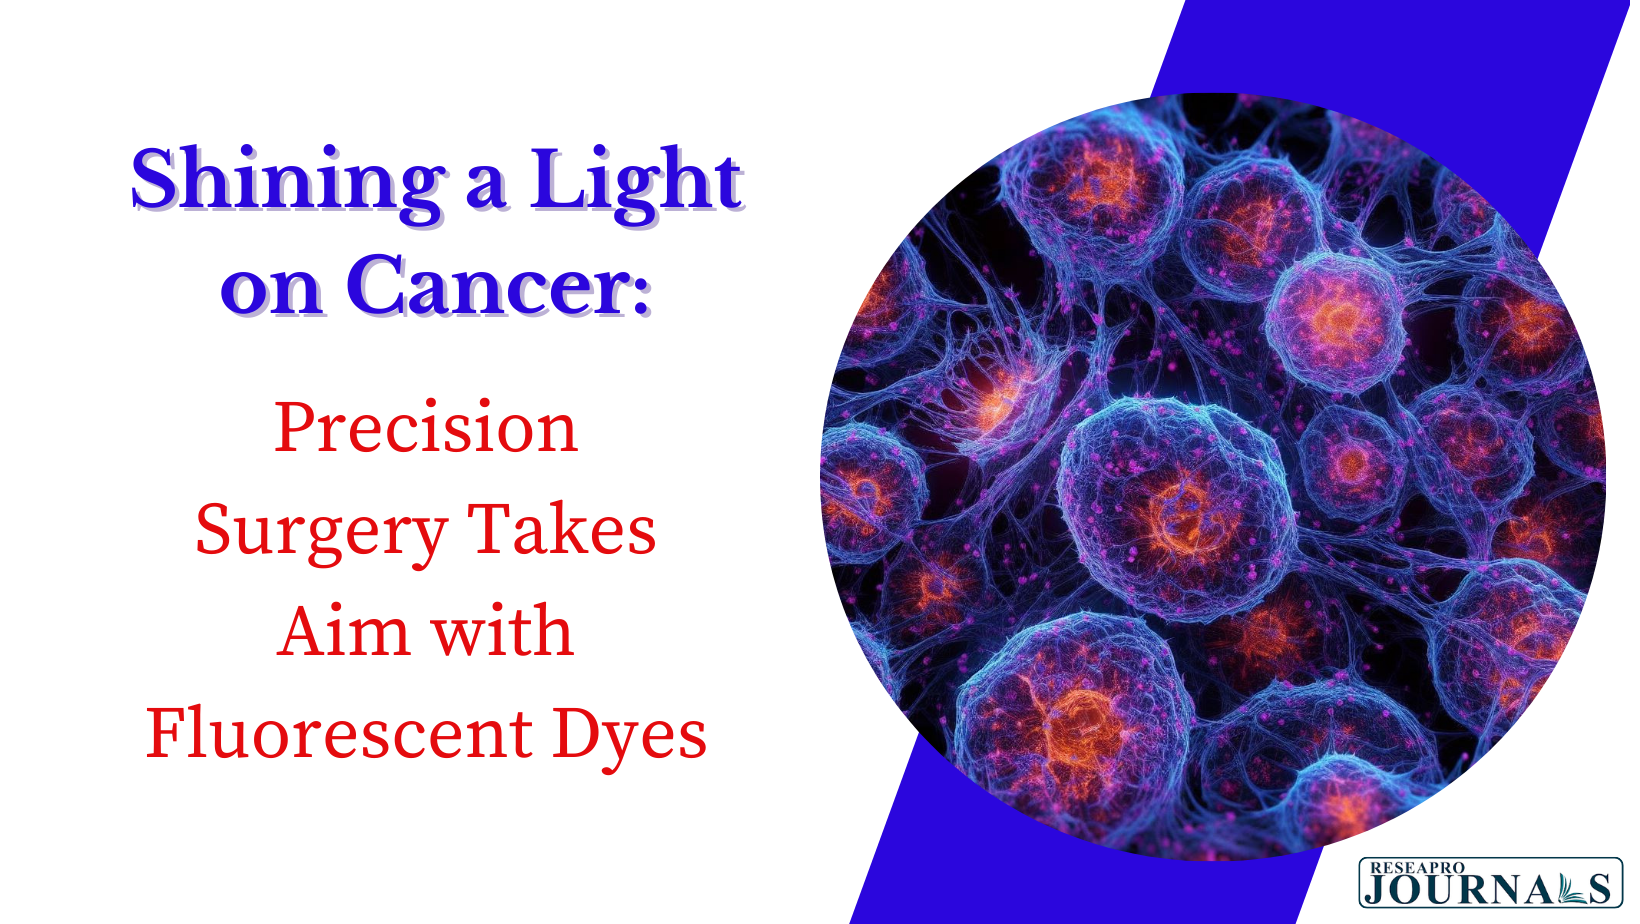 Shining a Light on Cancer: Precision Surgery Takes Aim with Fluorescent Dyes